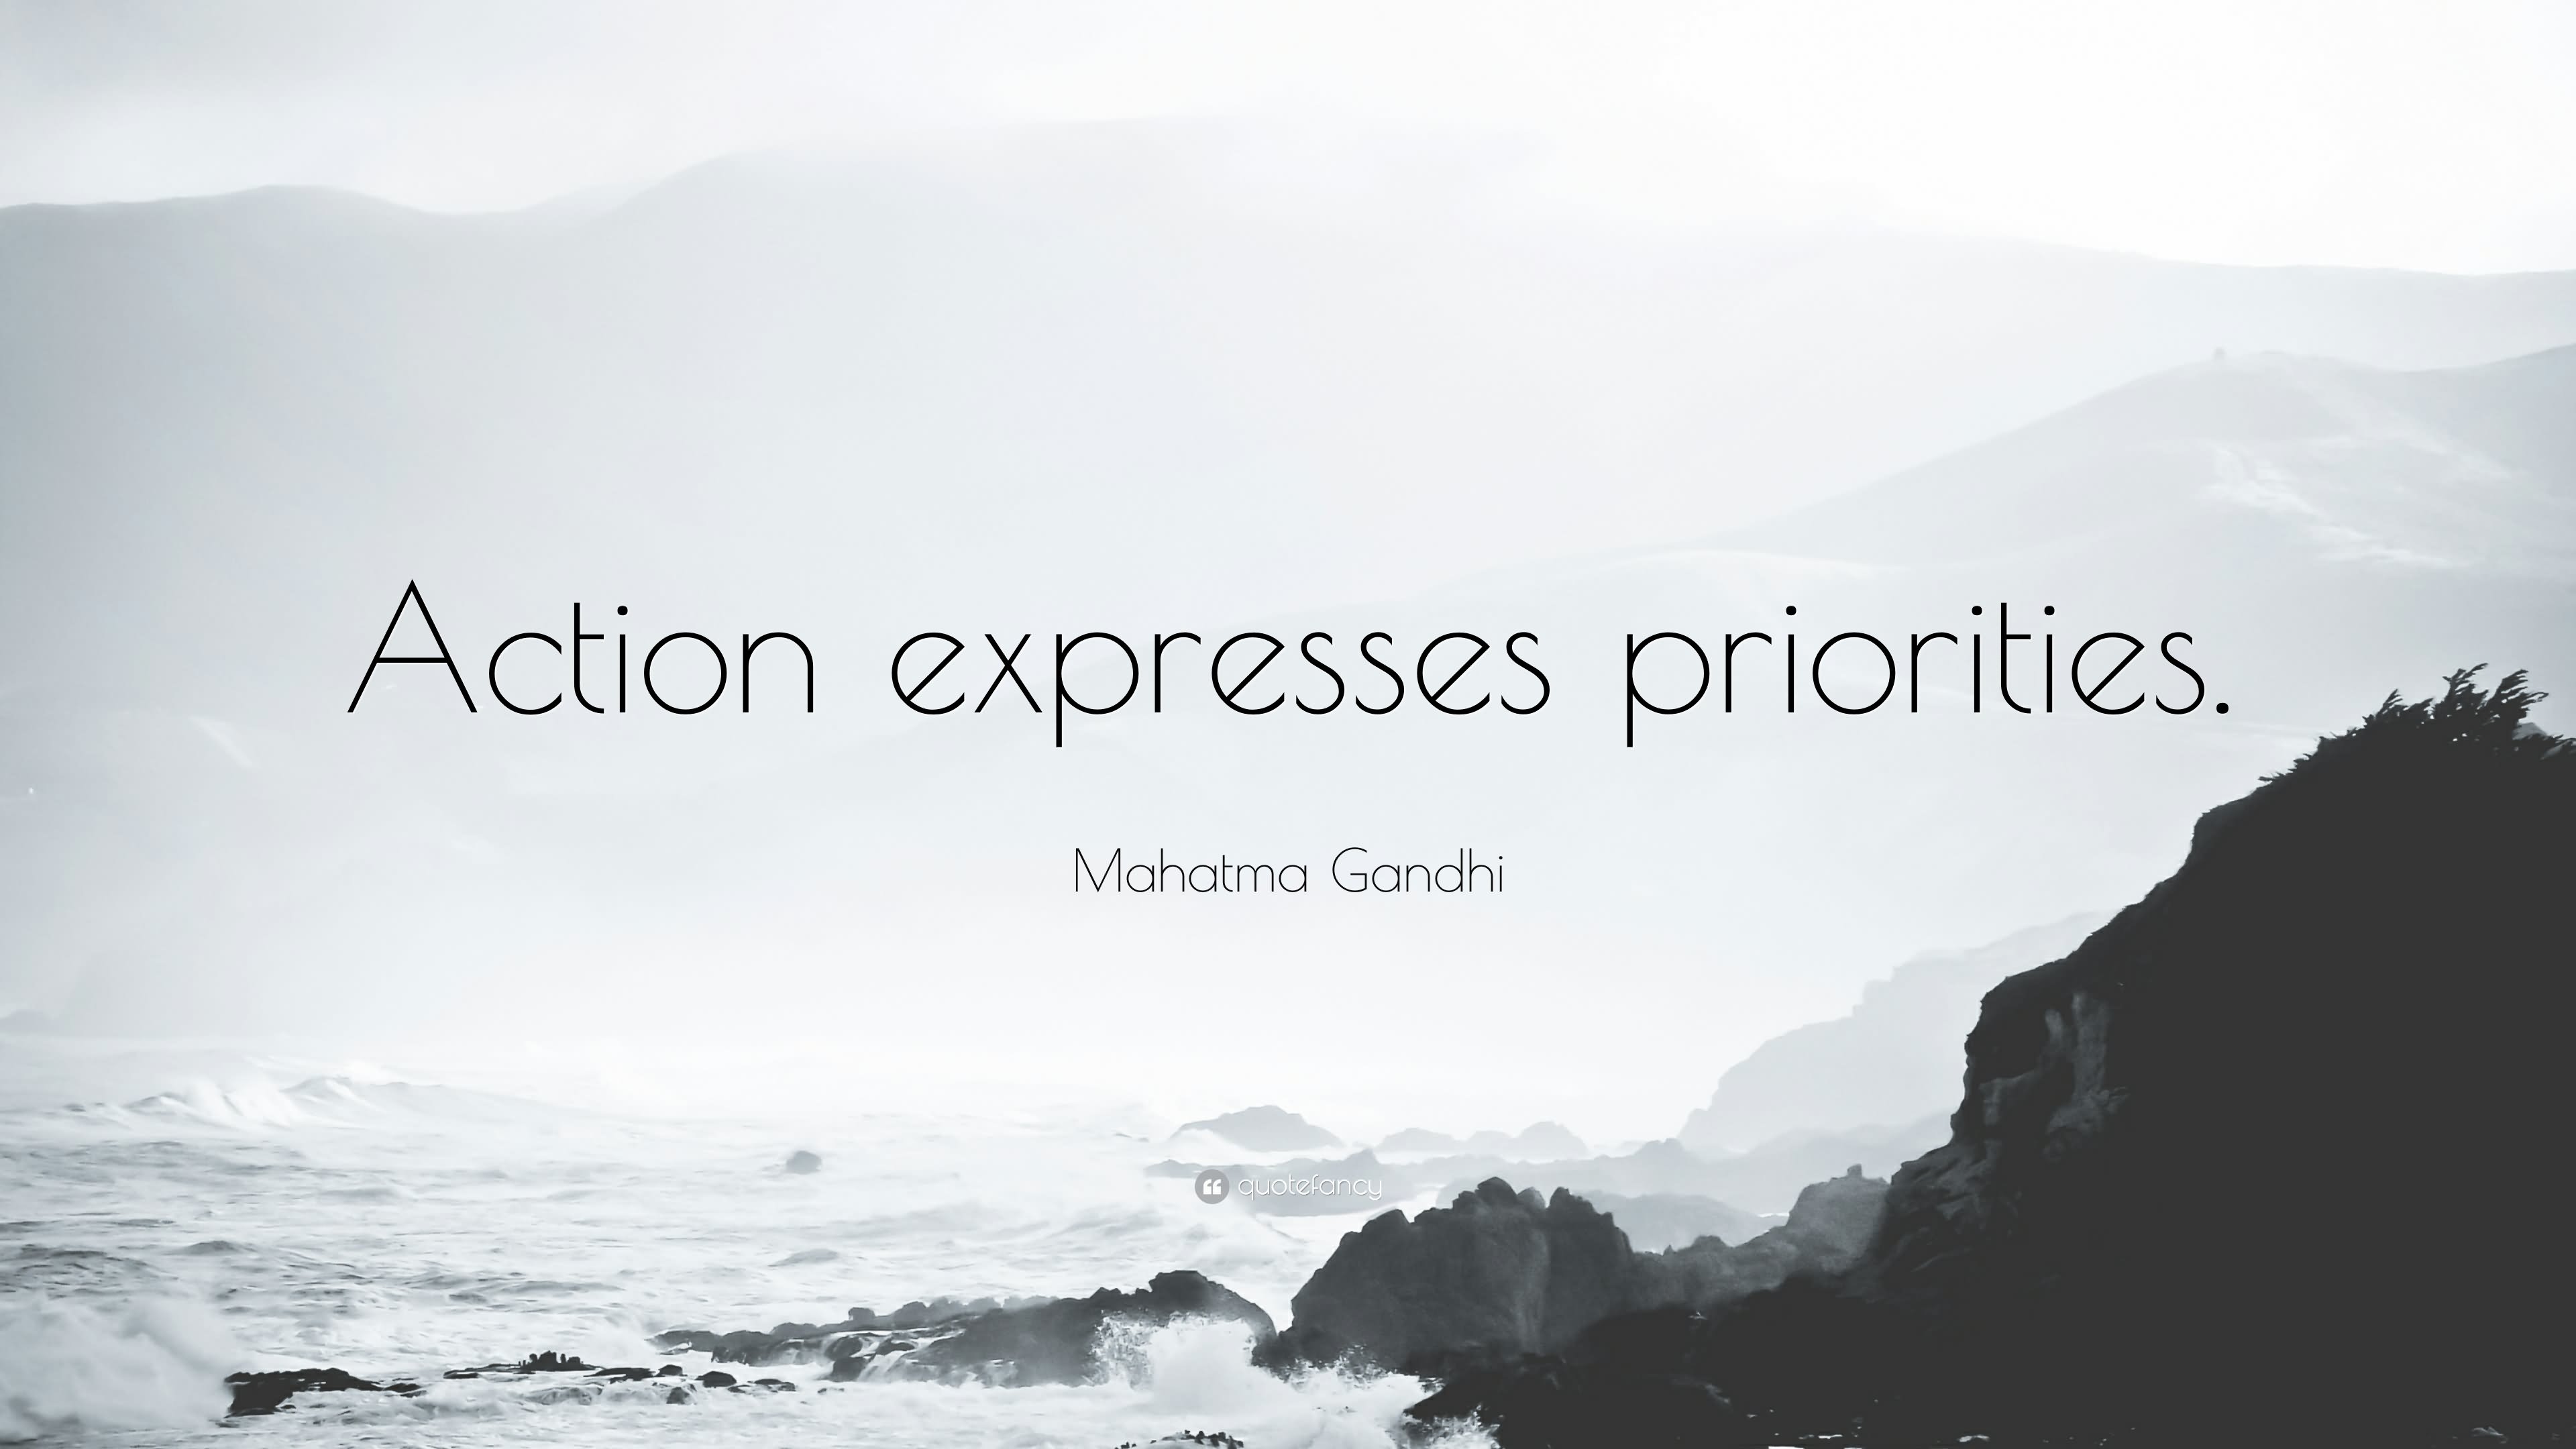 Action expresses priorities (26)